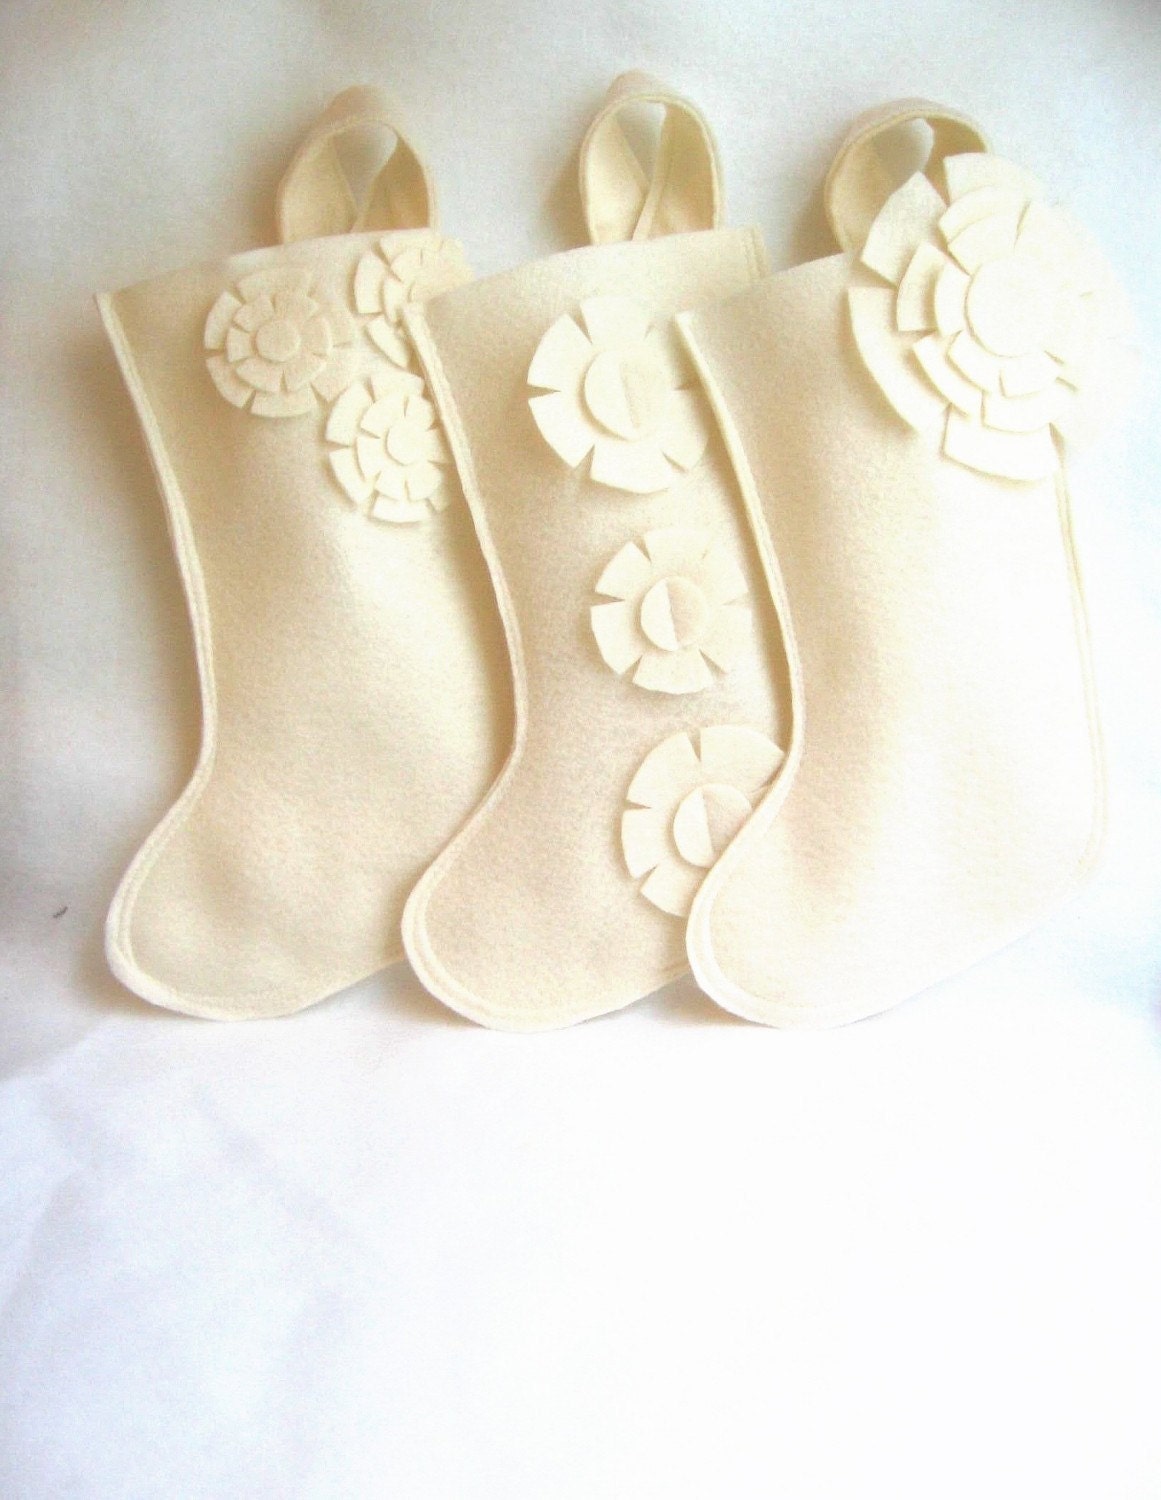 january delivery - ivory cream Christmas stocking in eco friendly felt. you choose the style